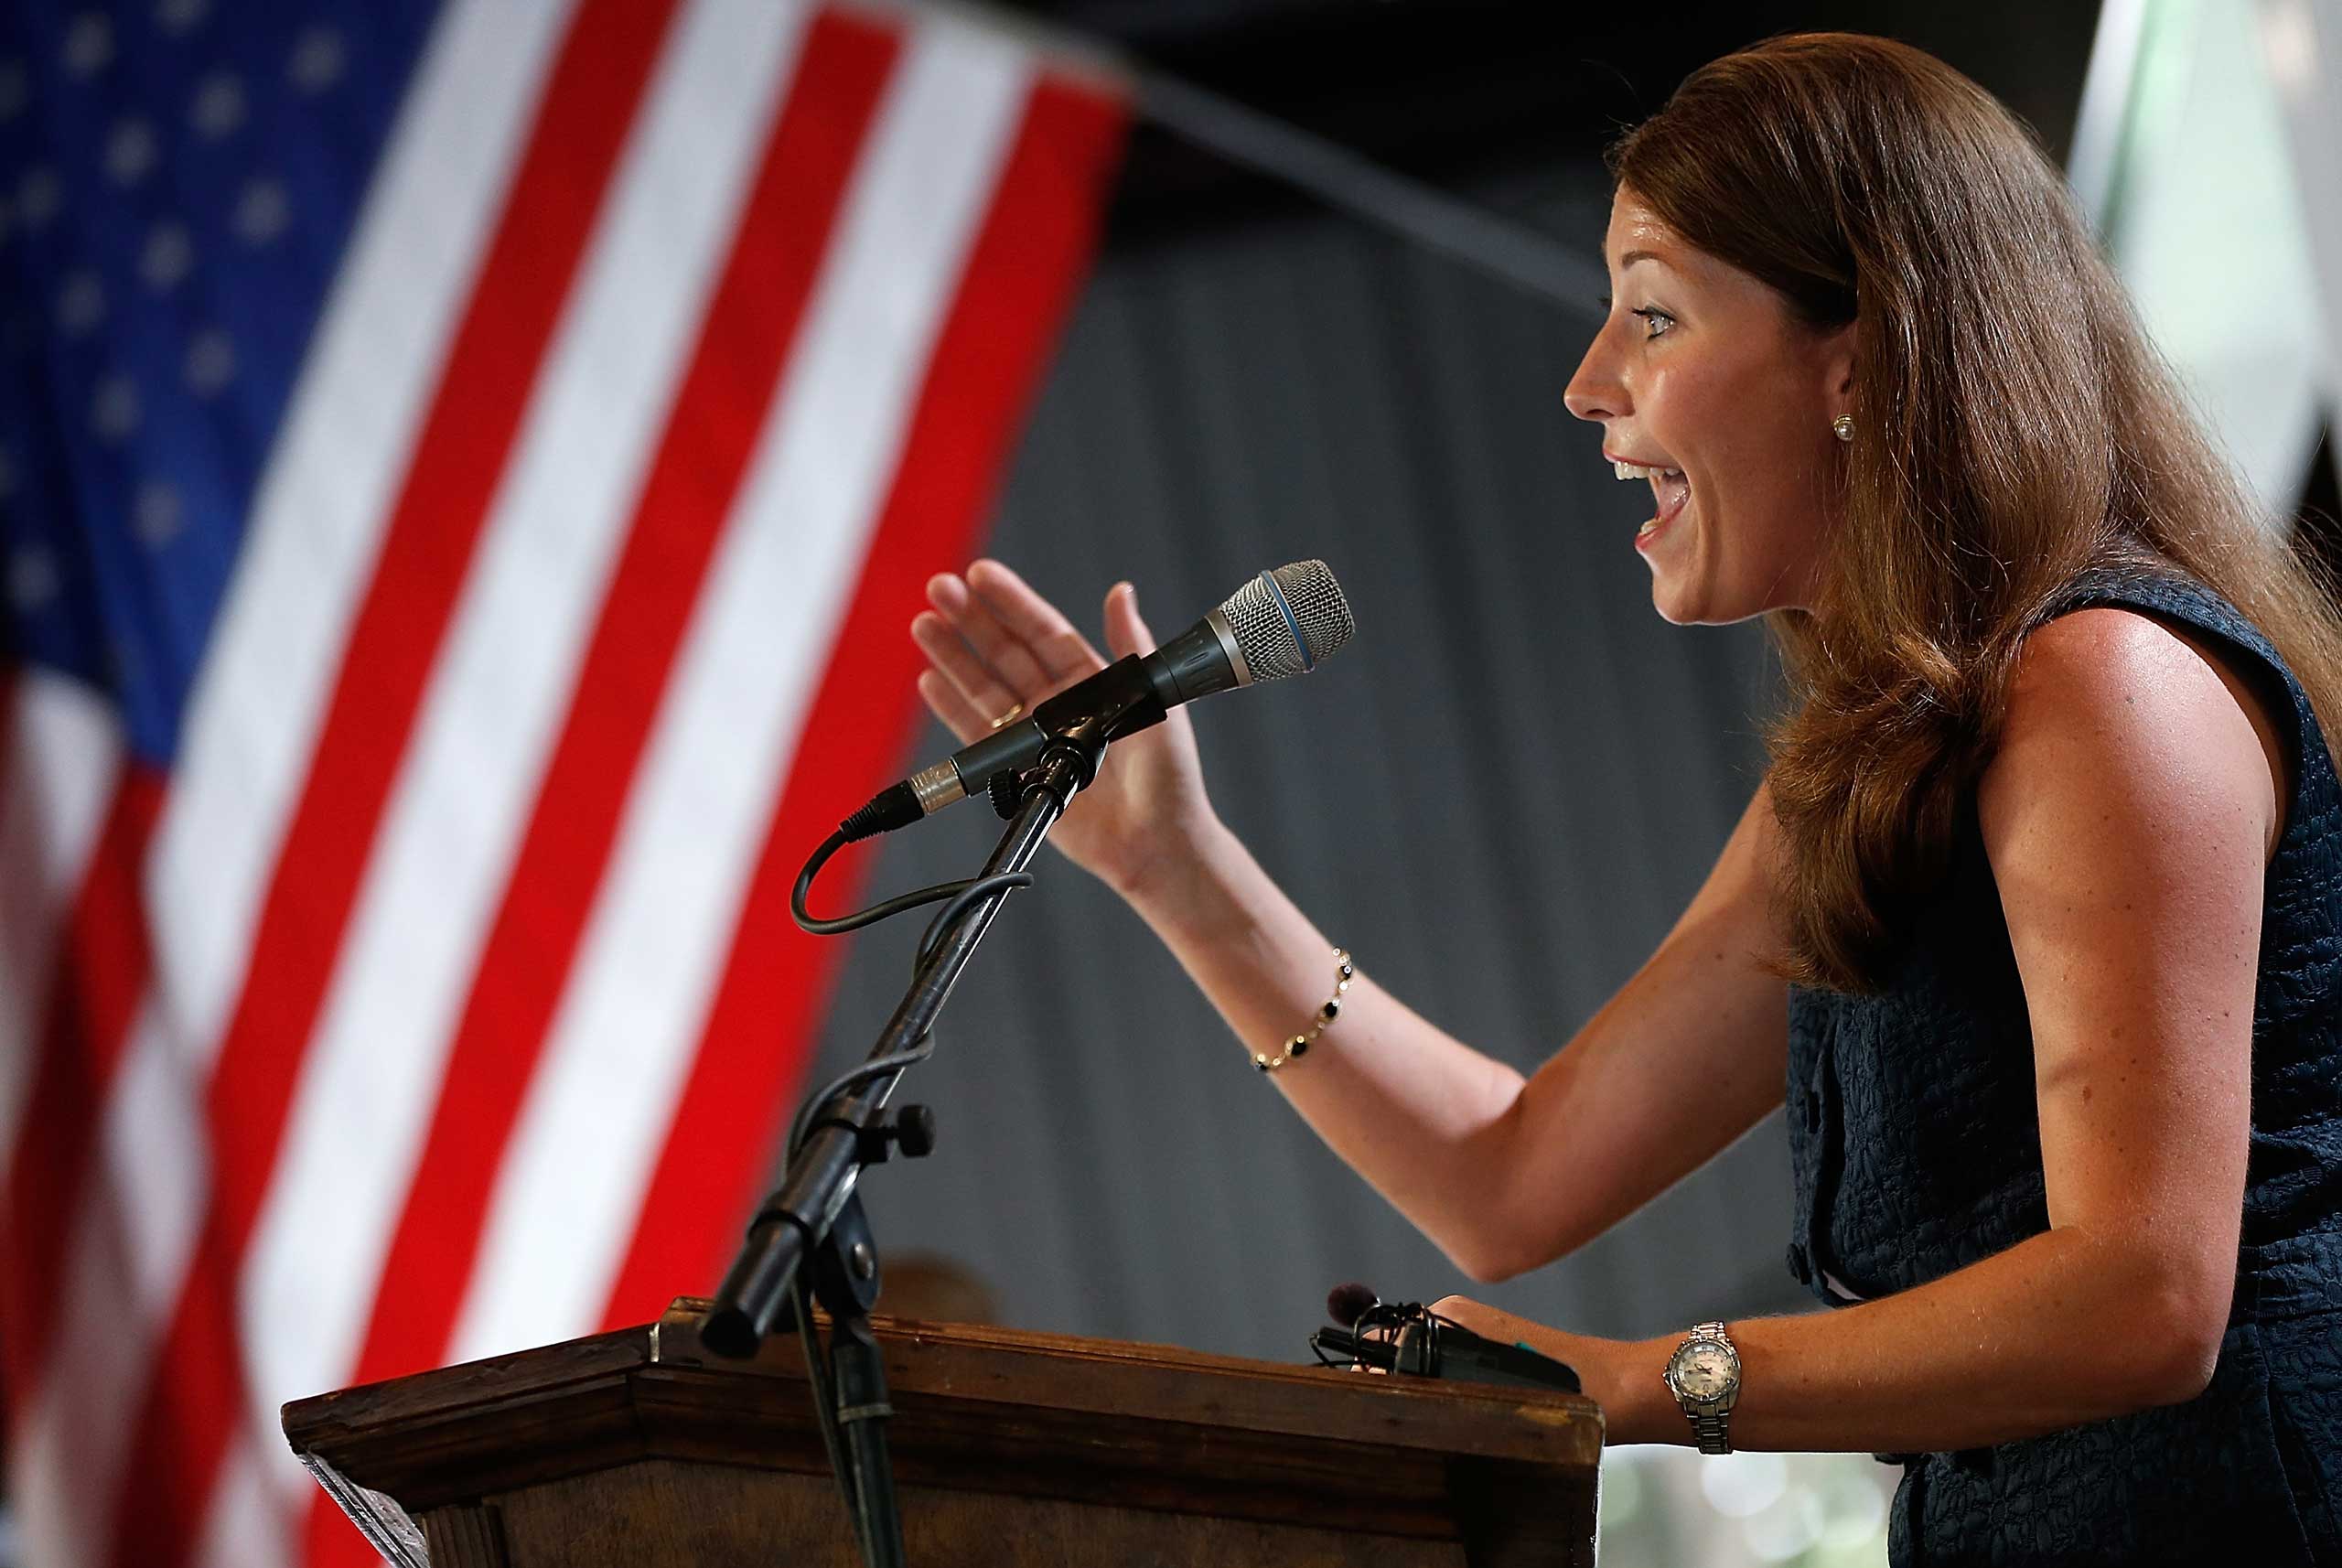 Kentucky's Democratic U.S. Senate nominee, and Kentucky Secretary of State, Alison Lundergan Grimes speaks at the Fancy Farm picnic in Fancy Farm, Ky. on Aug.  2, 2014. (Win McNamee—Getty Images)